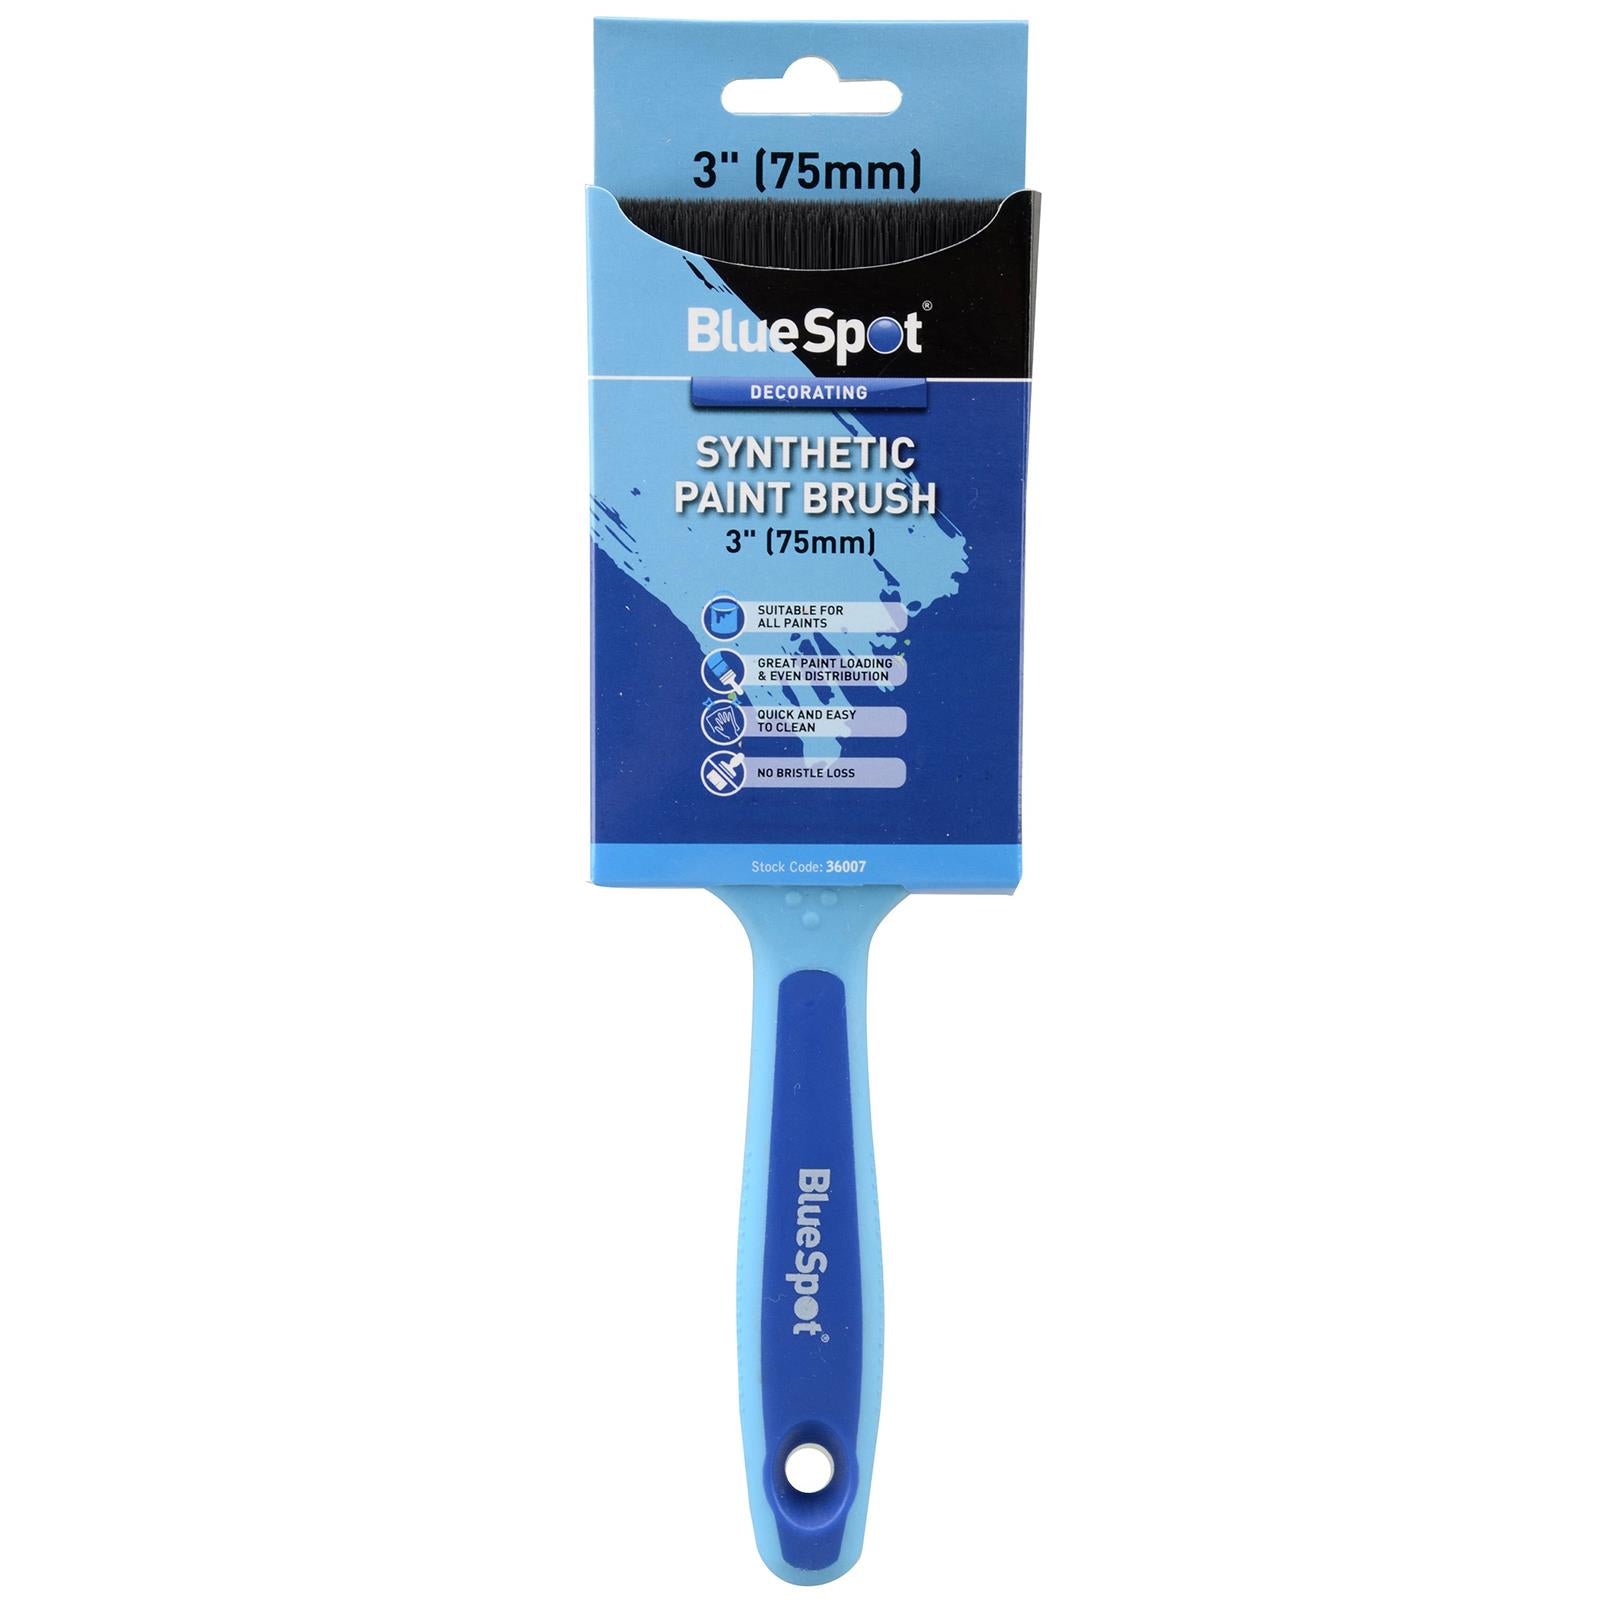 BlueSpot Synthetic Paint Brush with Soft Grip Handle 75mm (3")